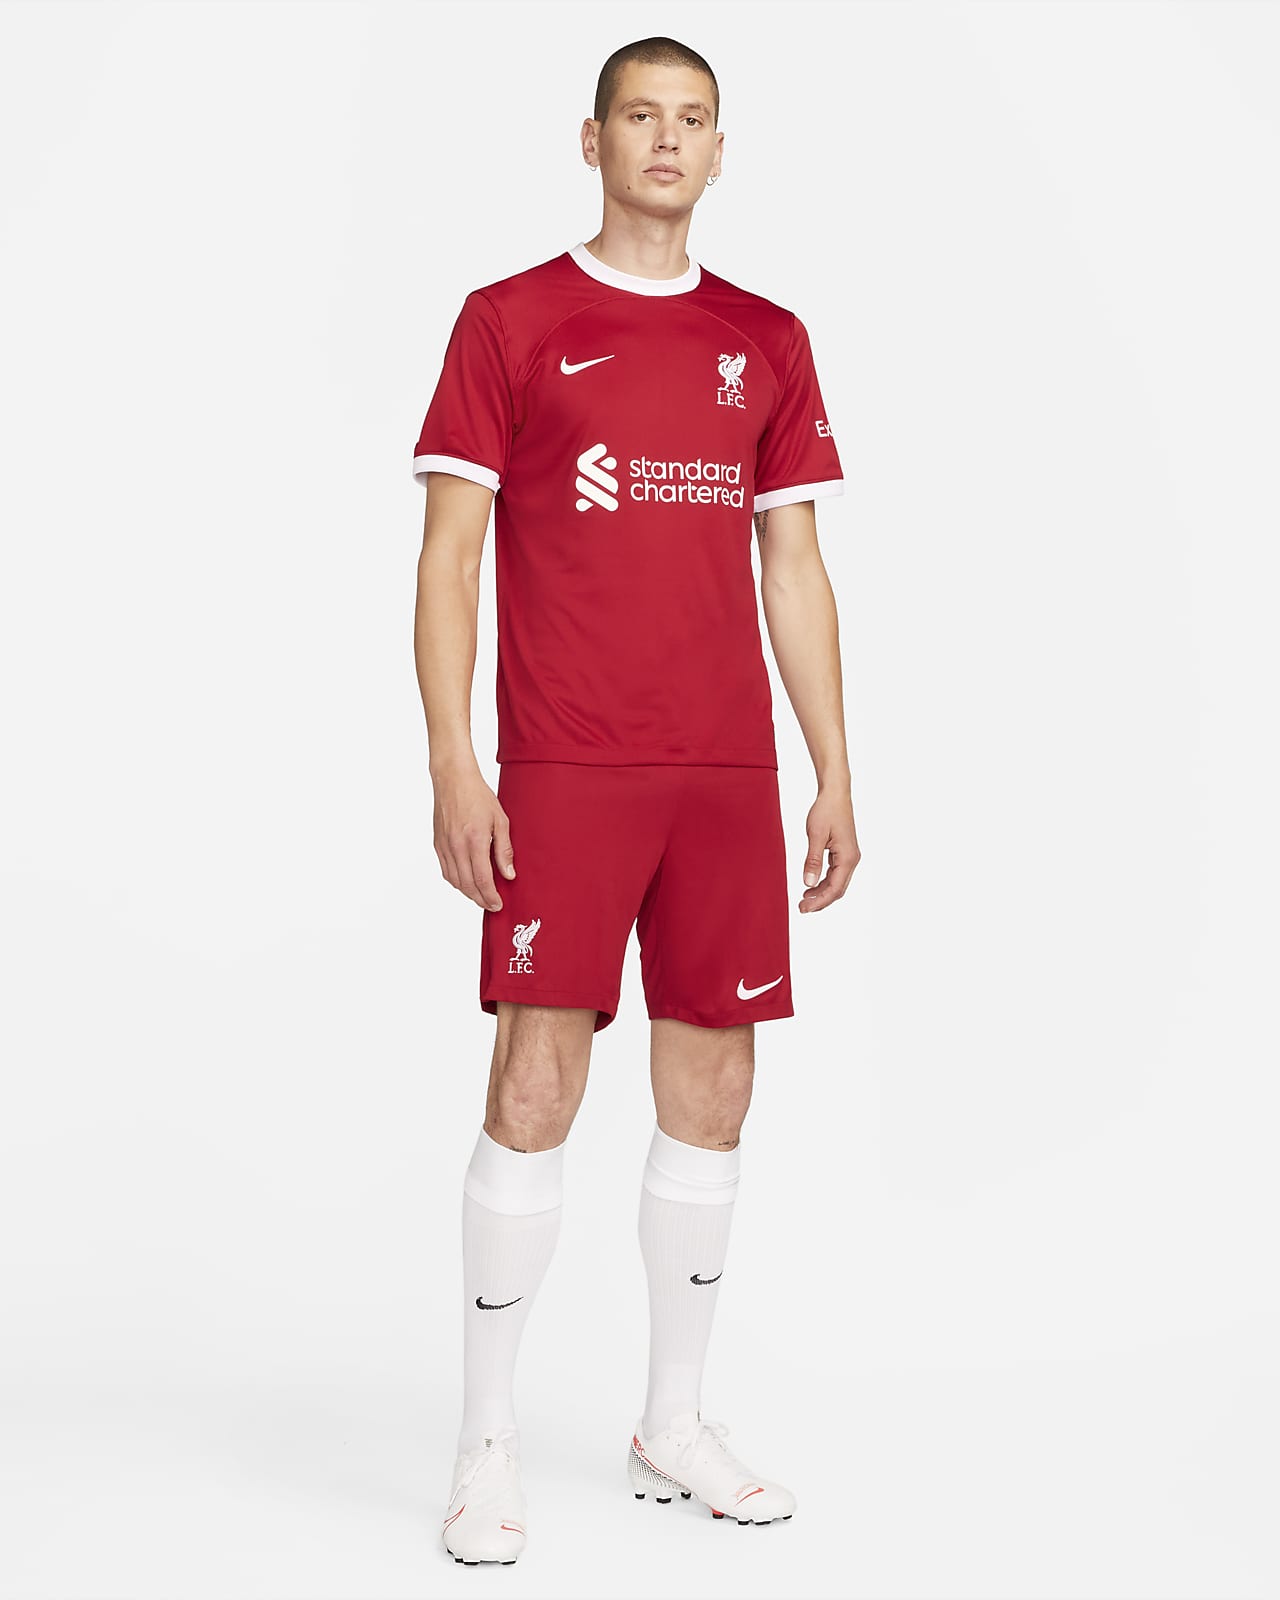 liverpool football jersey for sale